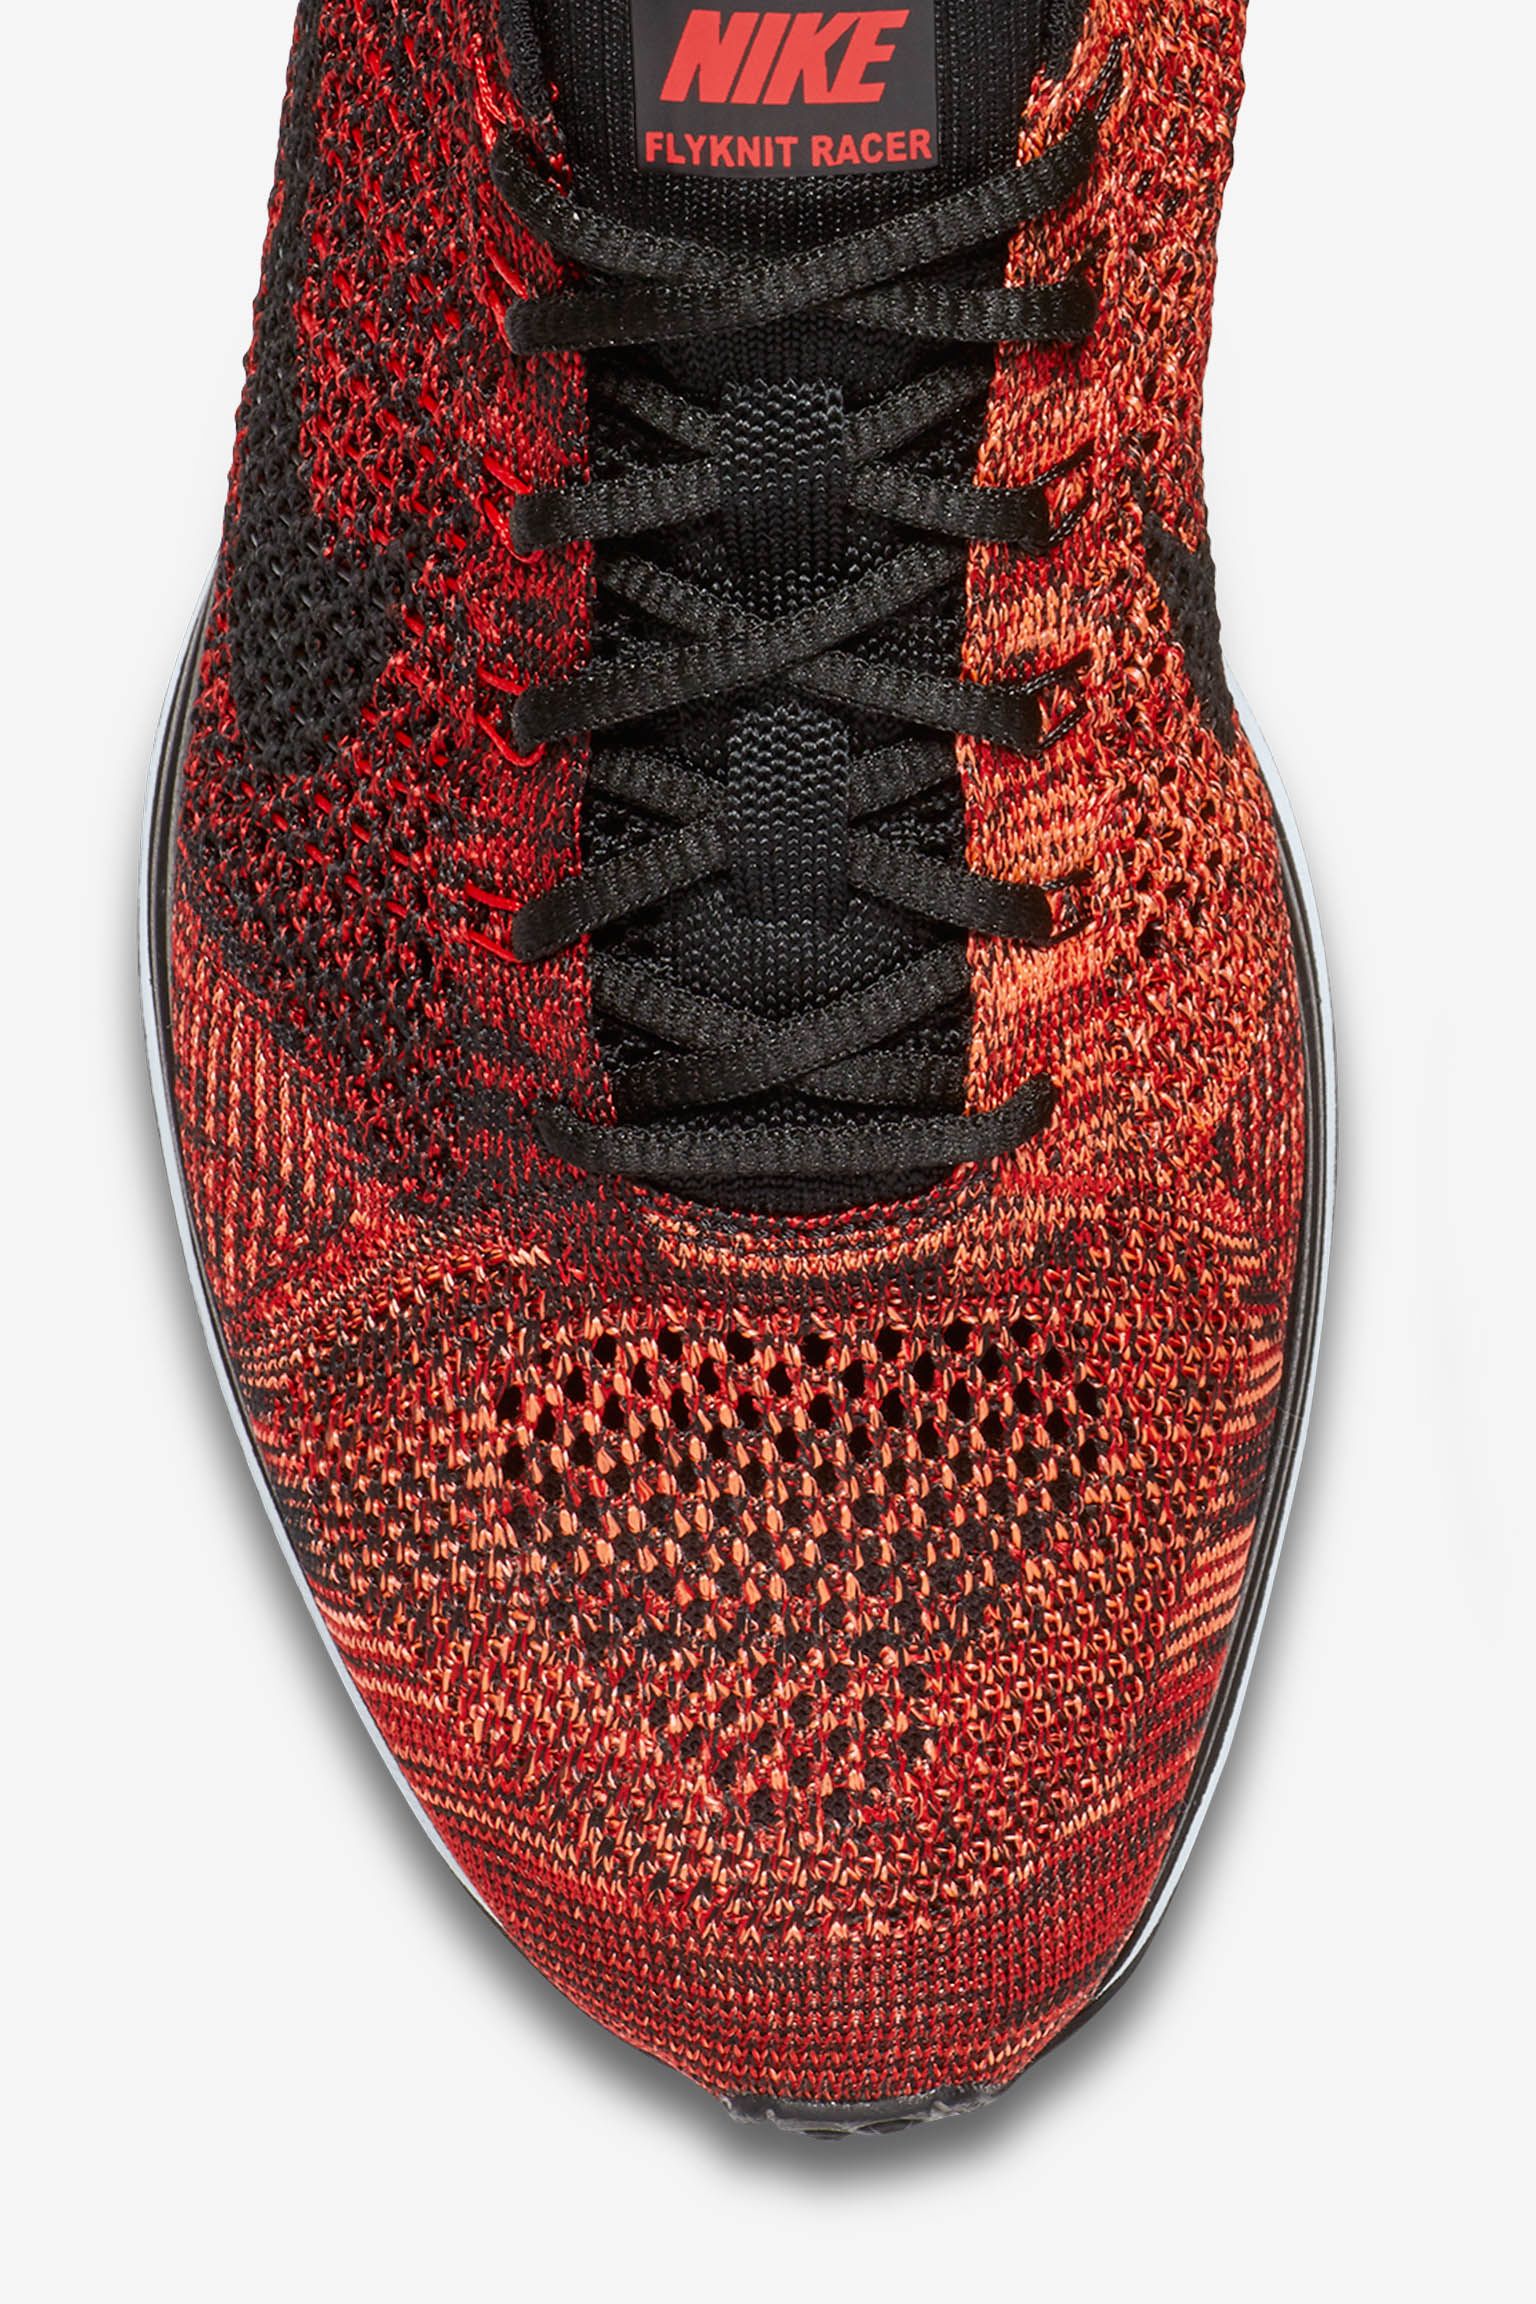 nike flyknit red and black